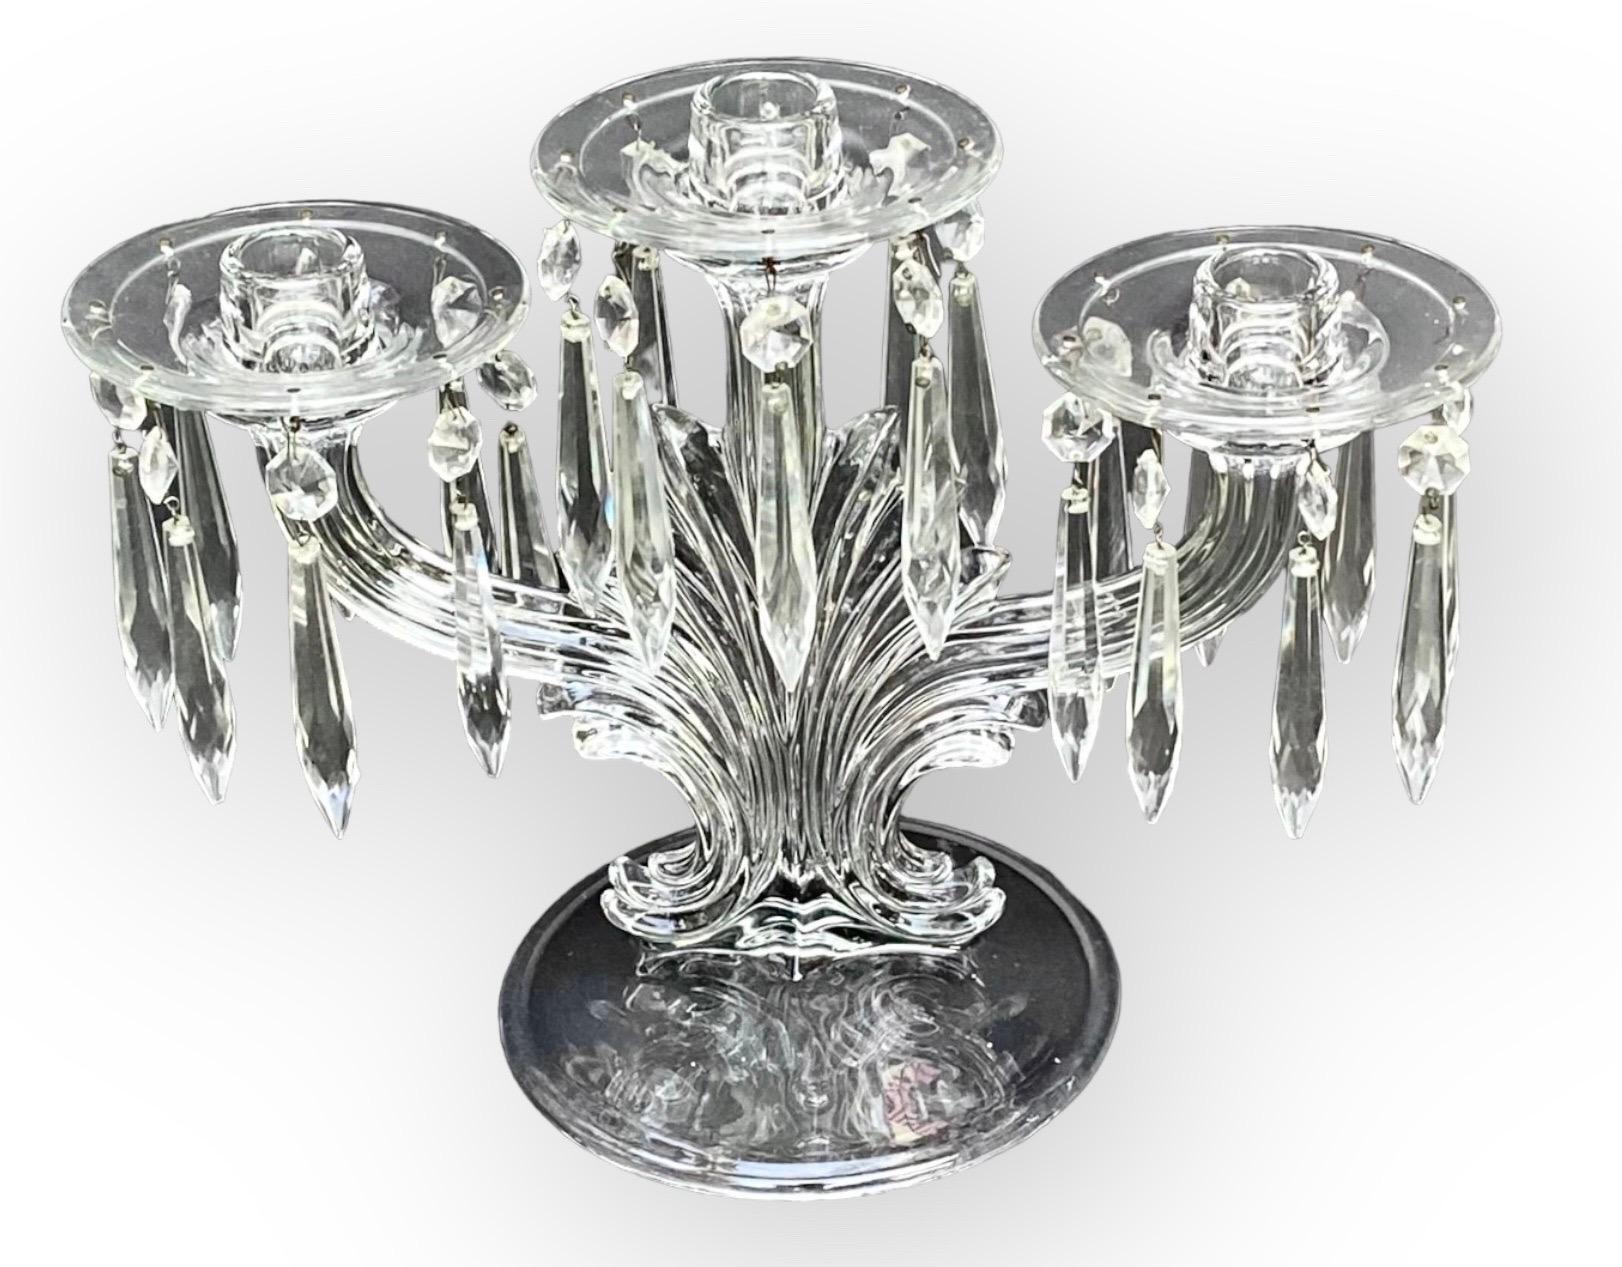 Pair of American Pressed Glass Three Light Candelabra, Early 20th C., on Swirled For Sale 1